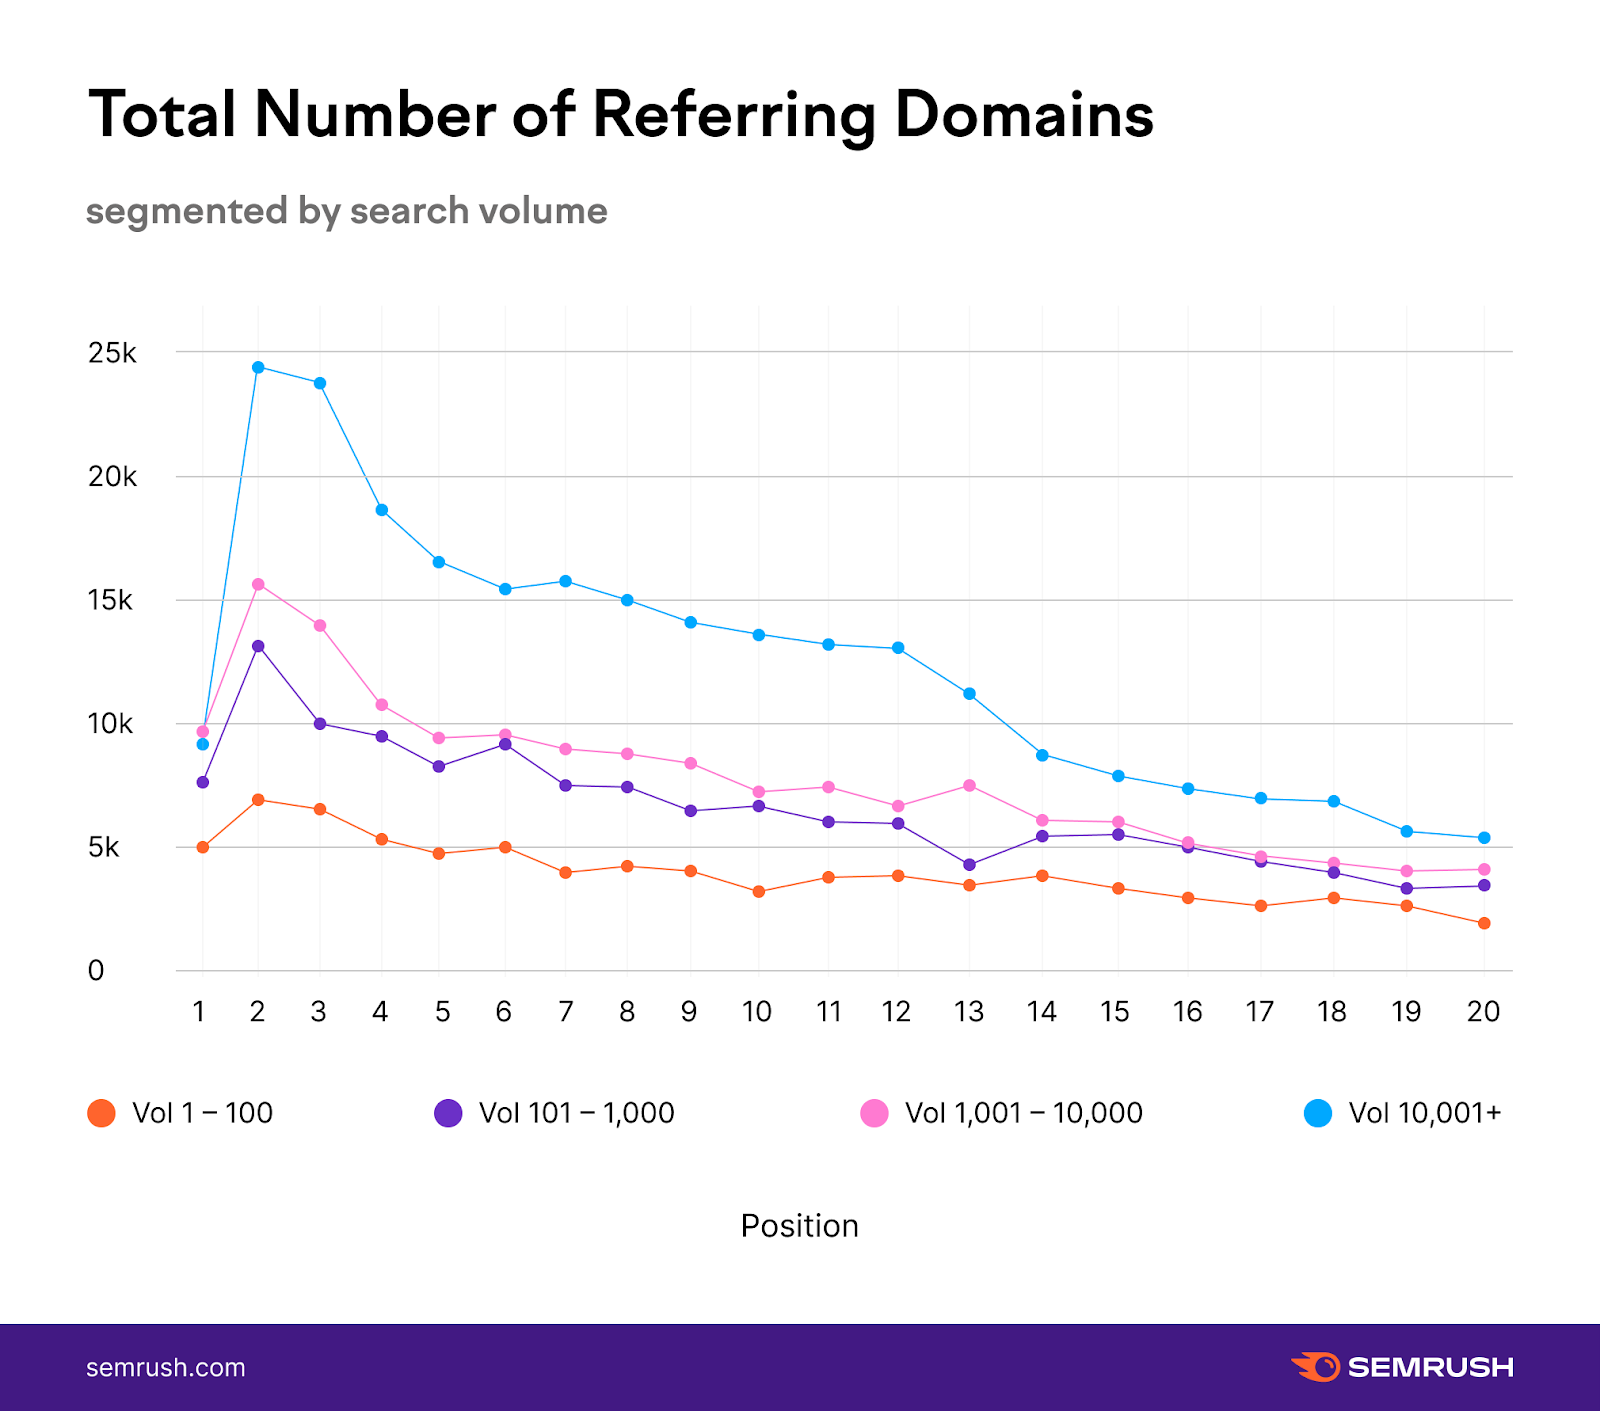 "Total Number of Referring Domains" graph